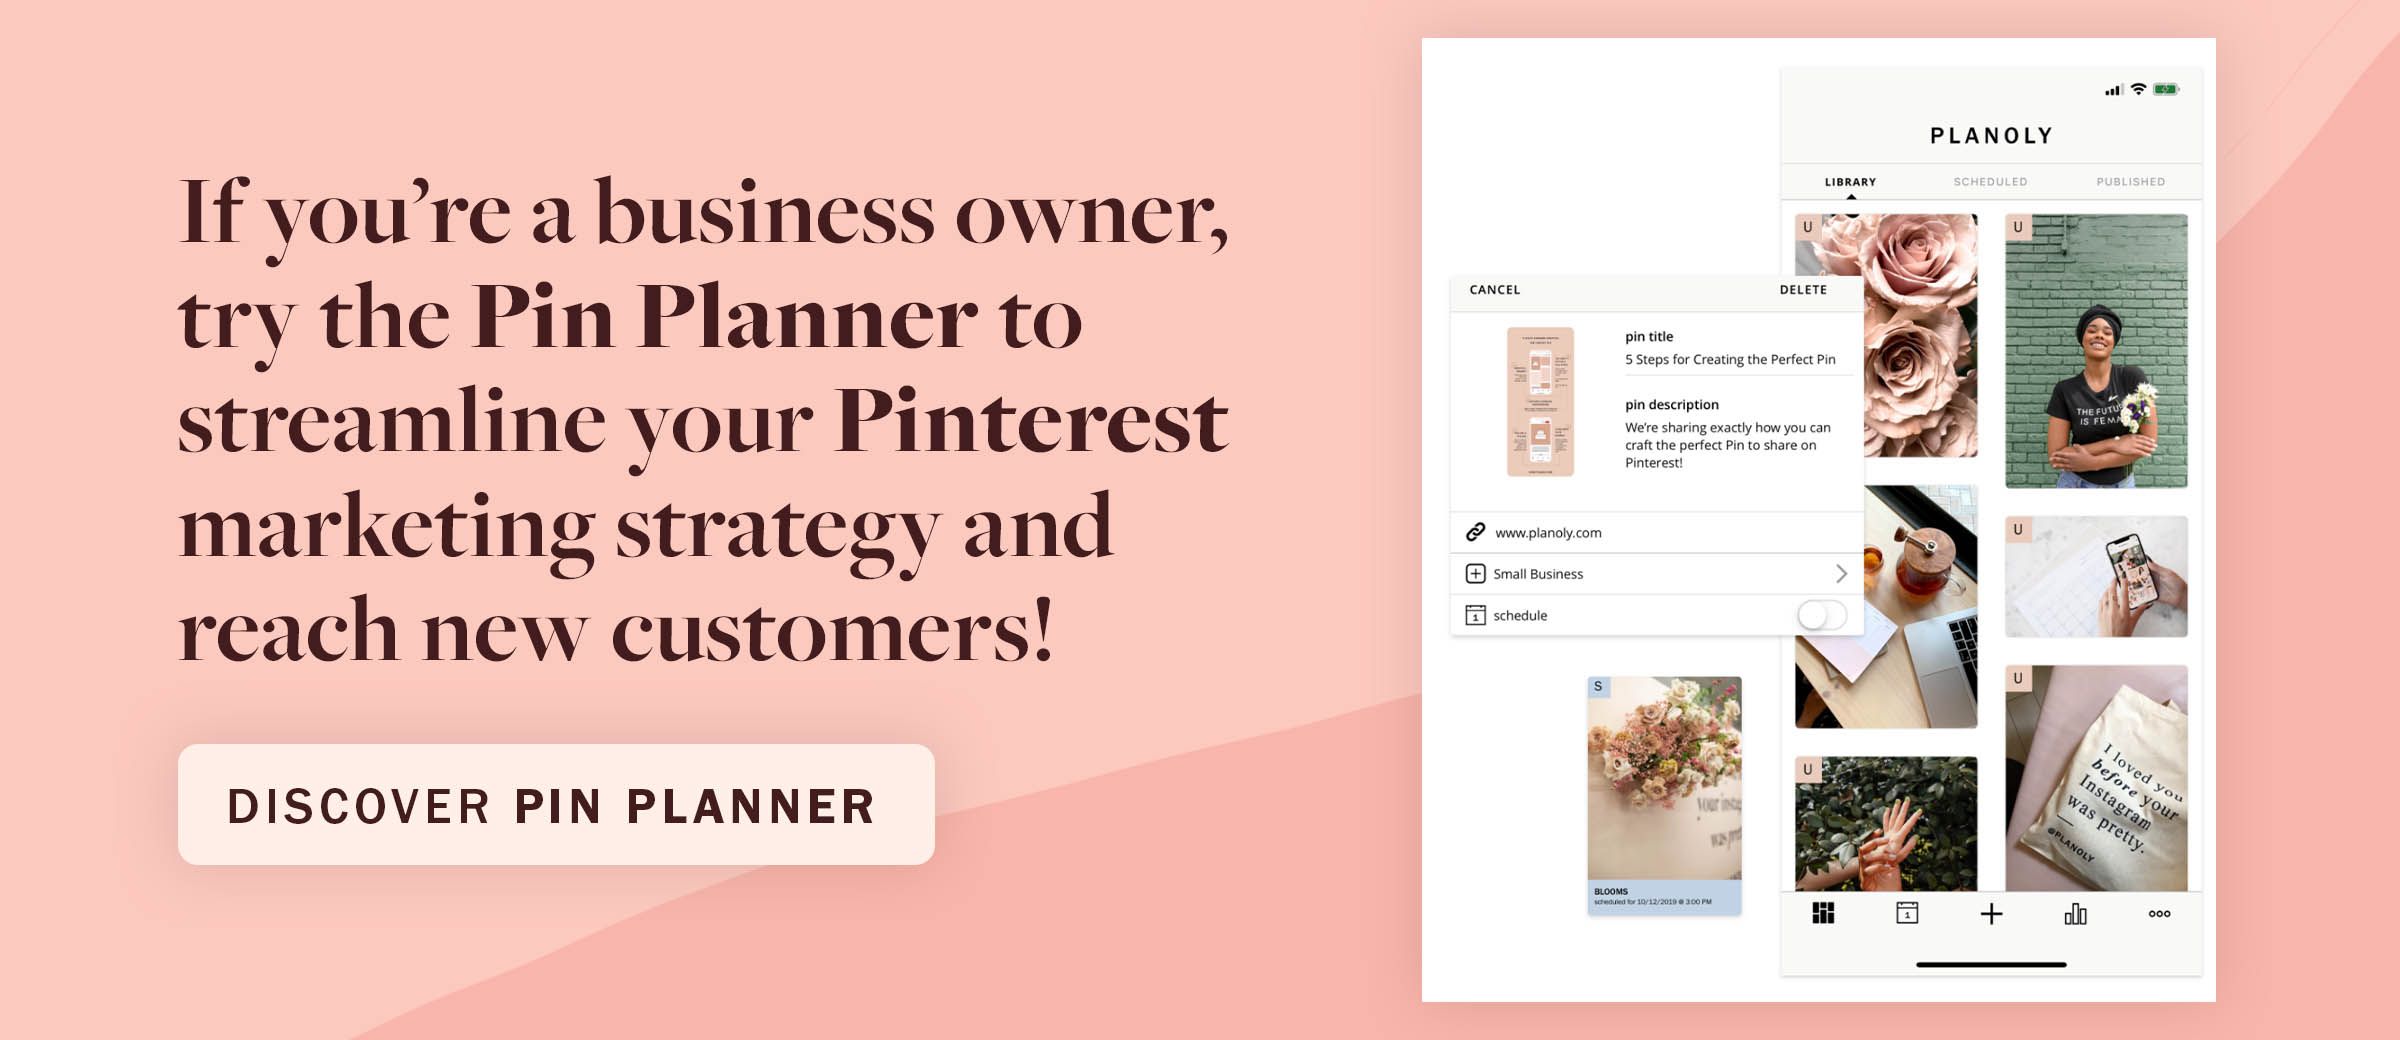 PLANOLY - Story Pins - Blog Post - Promotional Banner